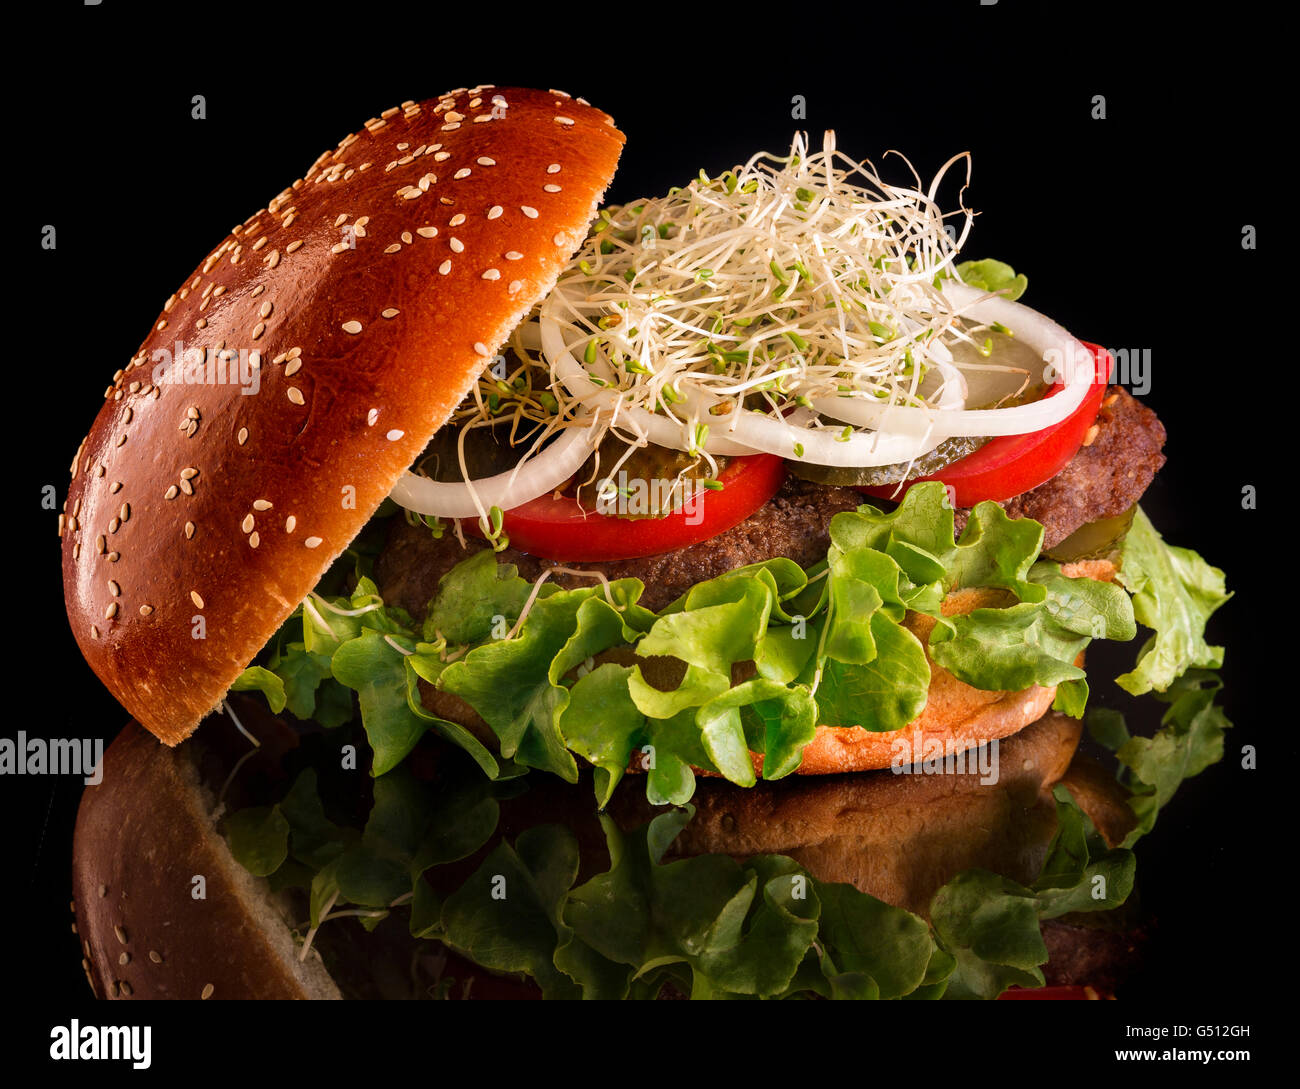 Juicy, tasty burger with pickles, tomatoes, onions and sprouts of flax on a black background Stock Photo